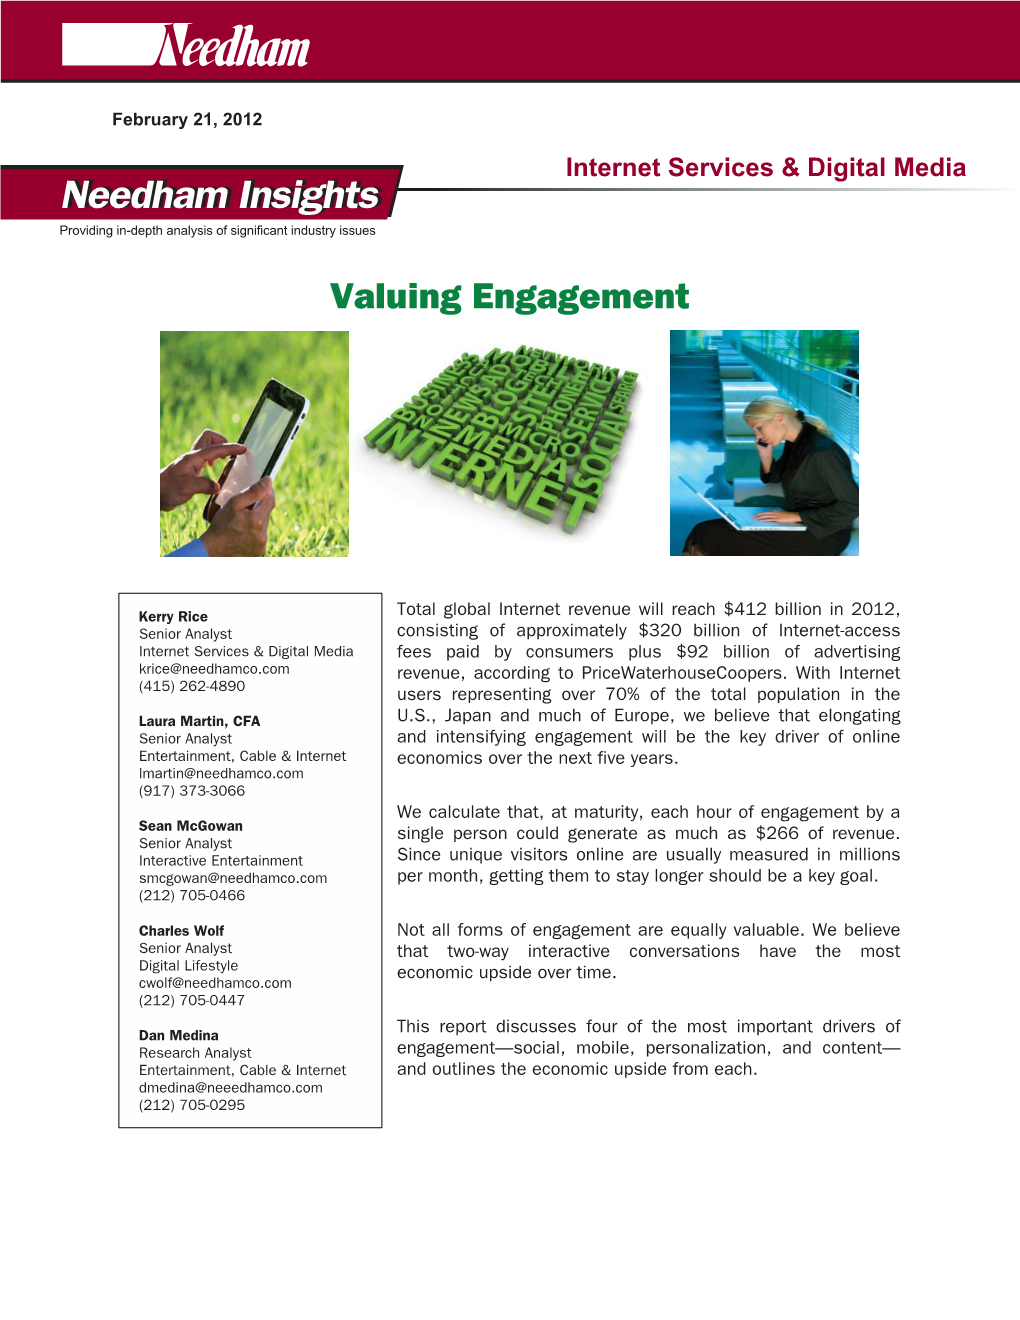 Needham Insightsinsights Providing In-Depth Analysis of Significant Industry Issues